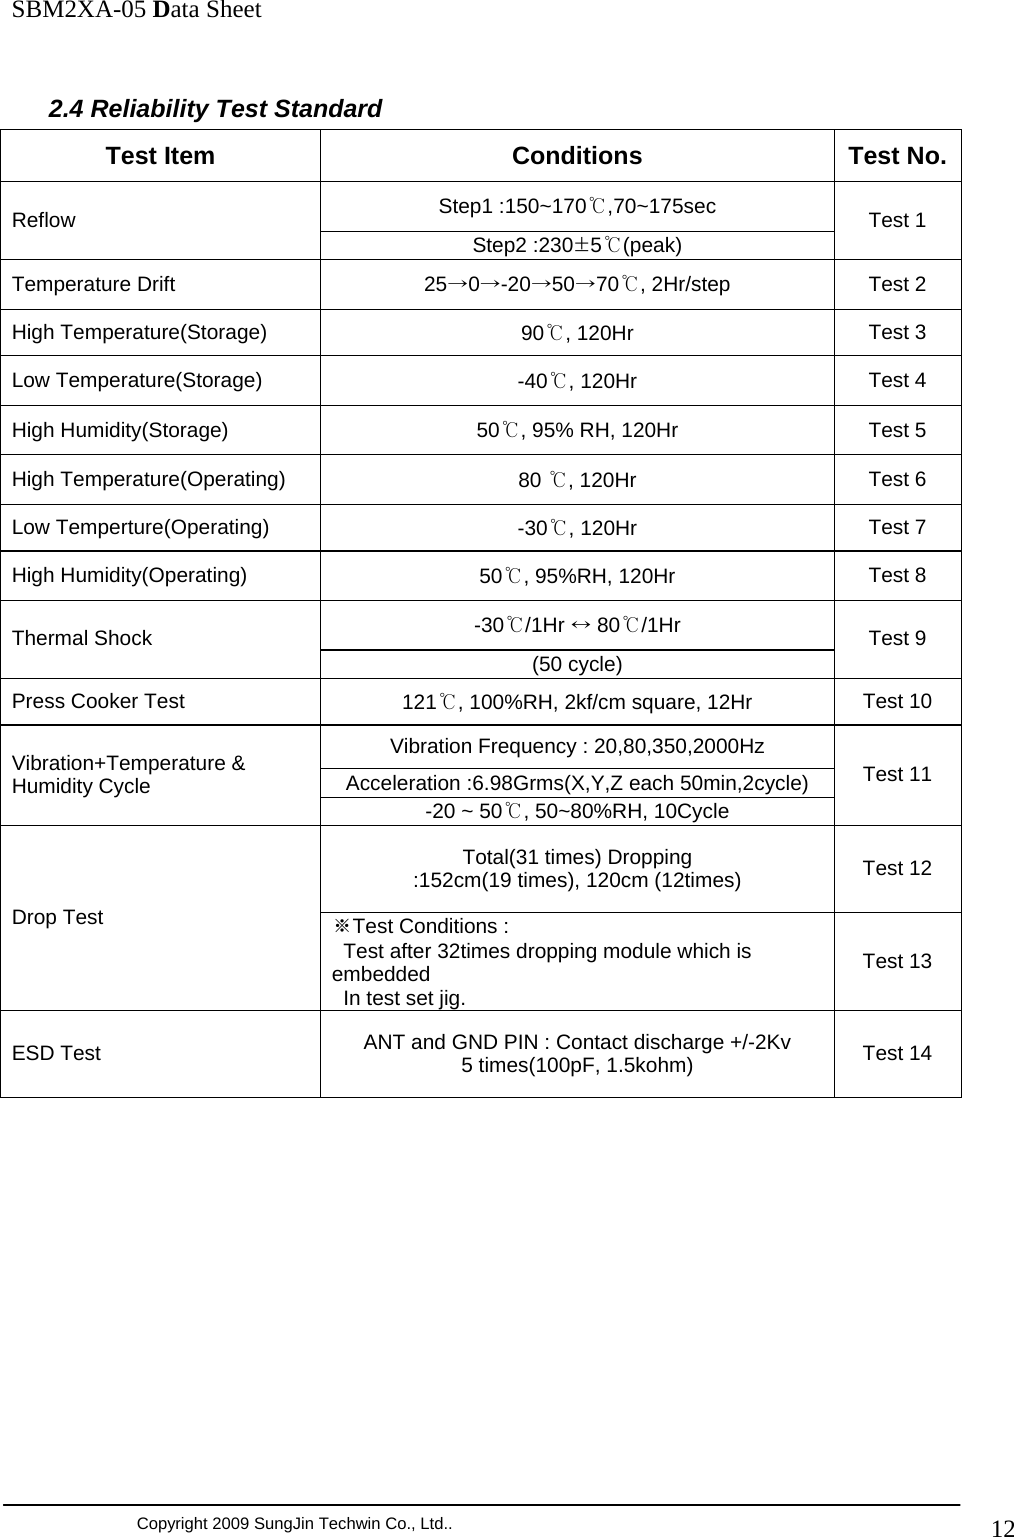               SBM2XA-05 Data Sheet  Copyright 2009 SungJin Techwin Co., Ltd..   12  2.4 Reliability Test Standard Test Item  Conditions  Test No.Step1 :150~170℃,70~175sec Reflow Step2 :230±5℃(peak) Test 1 Temperature Drift  25→0→-20→50→70℃, 2Hr/step  Test 2 High Temperature(Storage)  90℃, 120Hr  Test 3 Low Temperature(Storage)  -40℃, 120Hr  Test 4 High Humidity(Storage)  50℃, 95% RH, 120Hr  Test 5 High Temperature(Operating)  80 ℃, 120Hr  Test 6 Low Temperture(Operating)  -30℃, 120Hr  Test 7 High Humidity(Operating)  50℃, 95%RH, 120Hr  Test 8 -30℃/1Hr ↔ 80℃/1Hr Thermal Shock  (50 cycle)  Test 9 Press Cooker Test  121℃, 100%RH, 2kf/cm square, 12Hr  Test 10 Vibration Frequency : 20,80,350,2000Hz Acceleration :6.98Grms(X,Y,Z each 50min,2cycle) Vibration+Temperature &amp; Humidity Cycle -20 ~ 50℃, 50~80%RH, 10Cycle Test 11 Total(31 times) Dropping :152cm(19 times), 120cm (12times)  Test 12 Drop Test  ※Test Conditions :   Test after 32times dropping module which is embedded   In test set jig. Test 13 ESD Test  ANT and GND PIN : Contact discharge +/-2Kv 5 times(100pF, 1.5kohm)  Test 14             